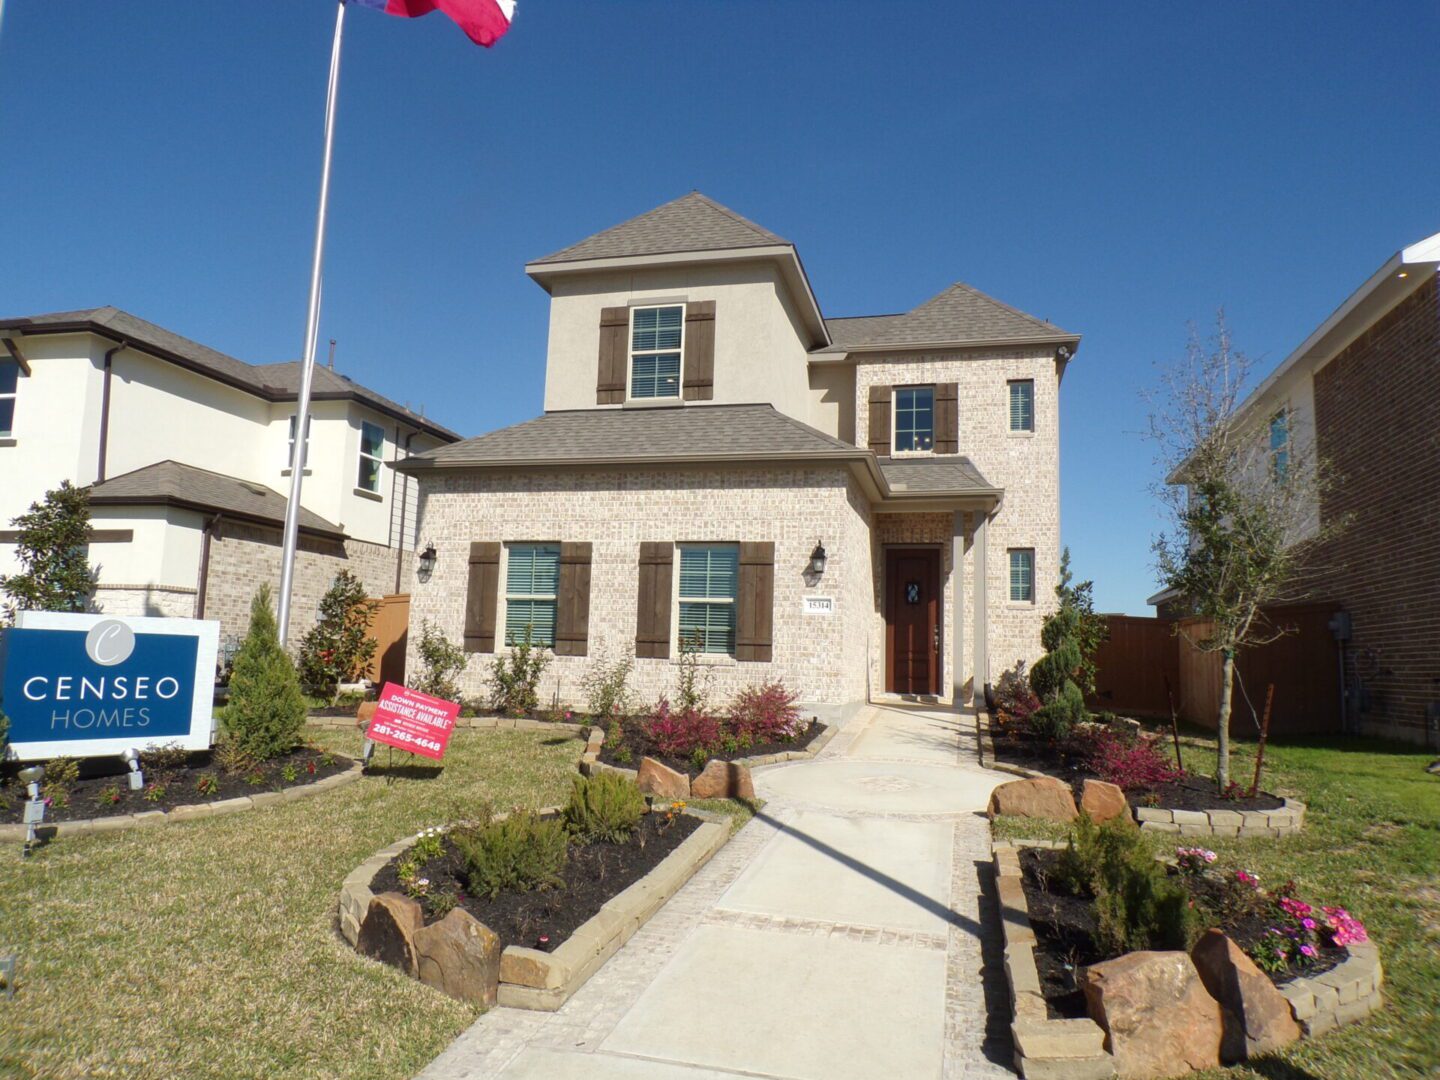 A Texas builders house with a flag in front of it.